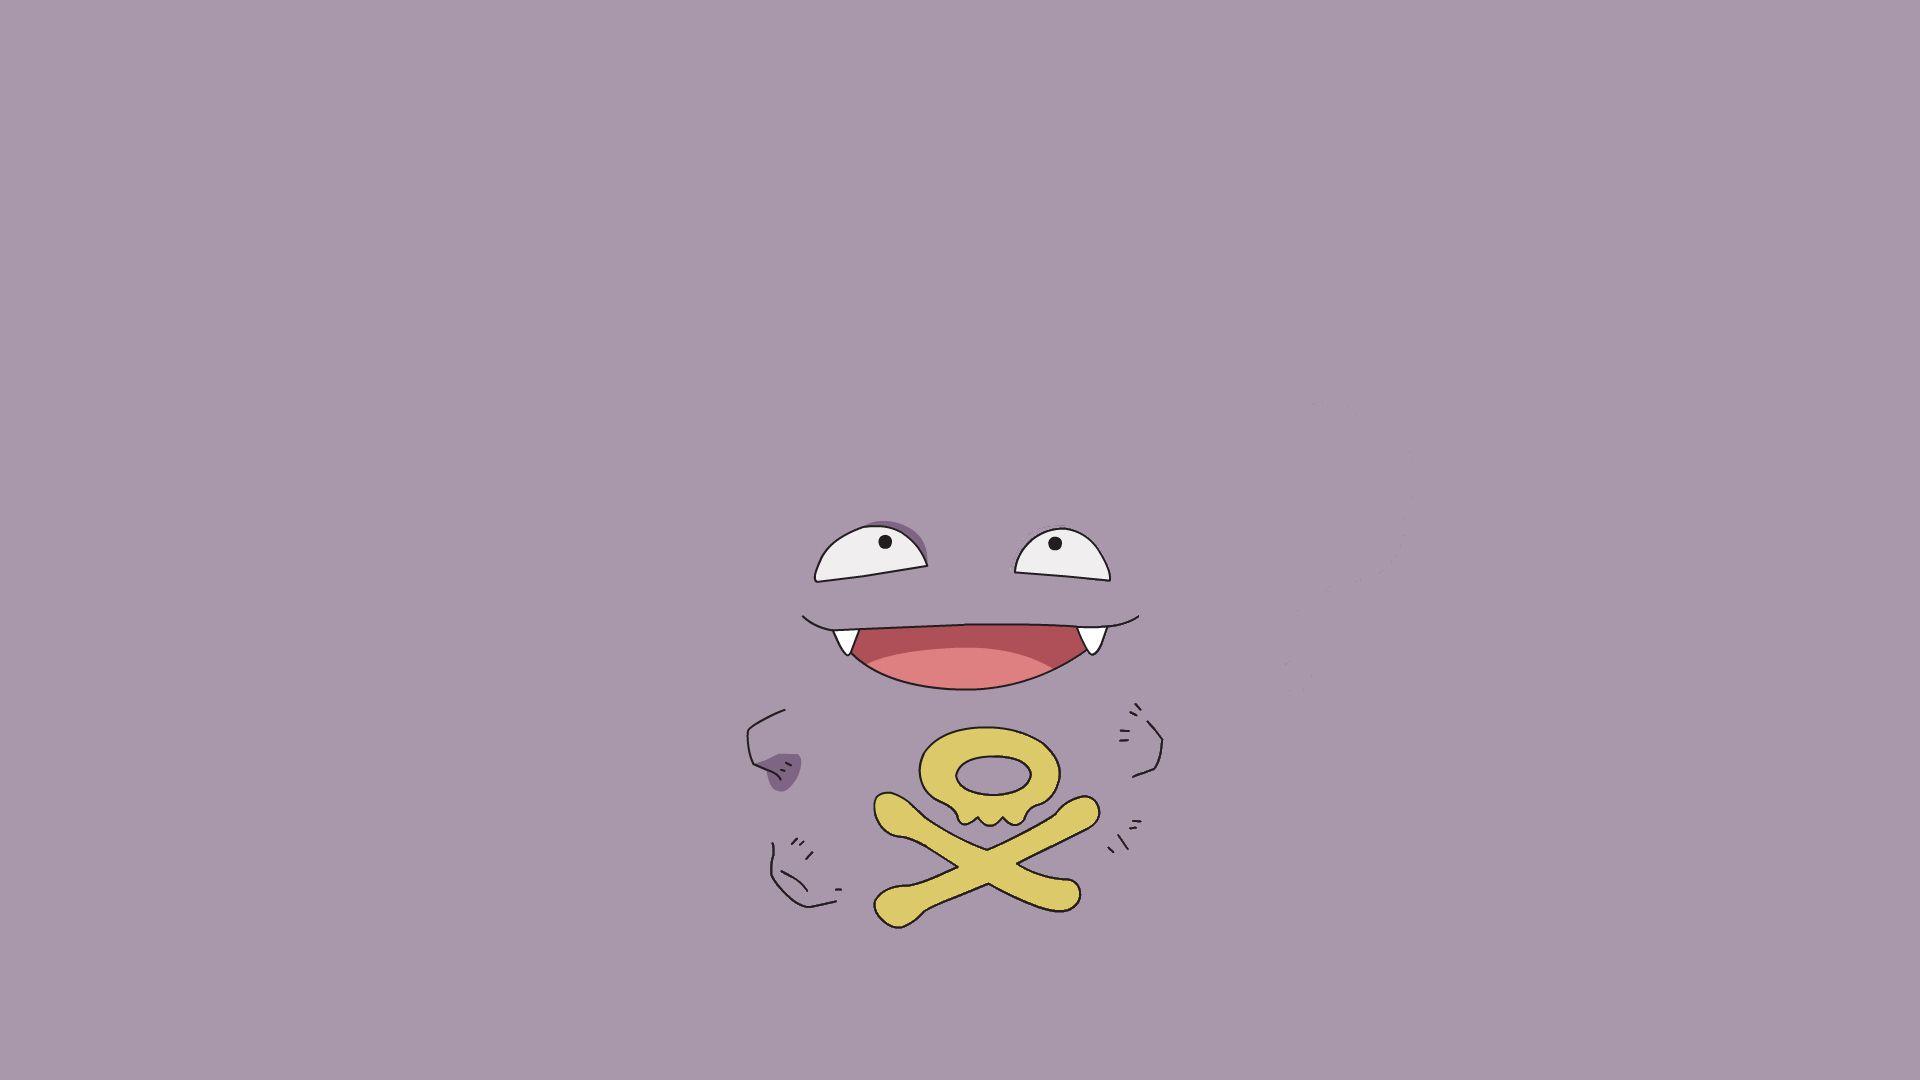 Day 2 of the Minimalistic Pokémon Wallpaper Journey :) Go Koffing